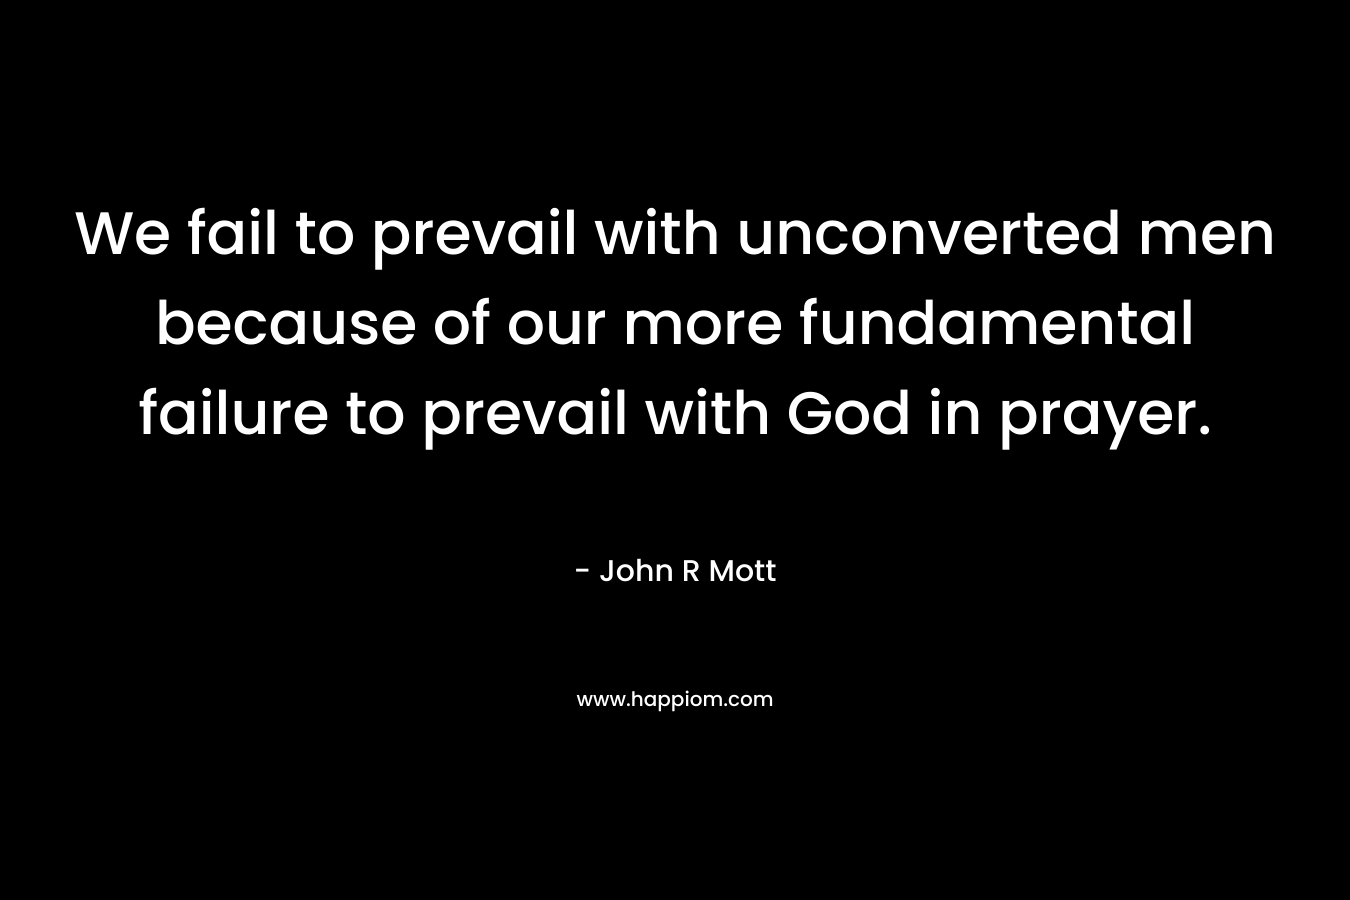 We fail to prevail with unconverted men because of our more fundamental failure to prevail with God in prayer.